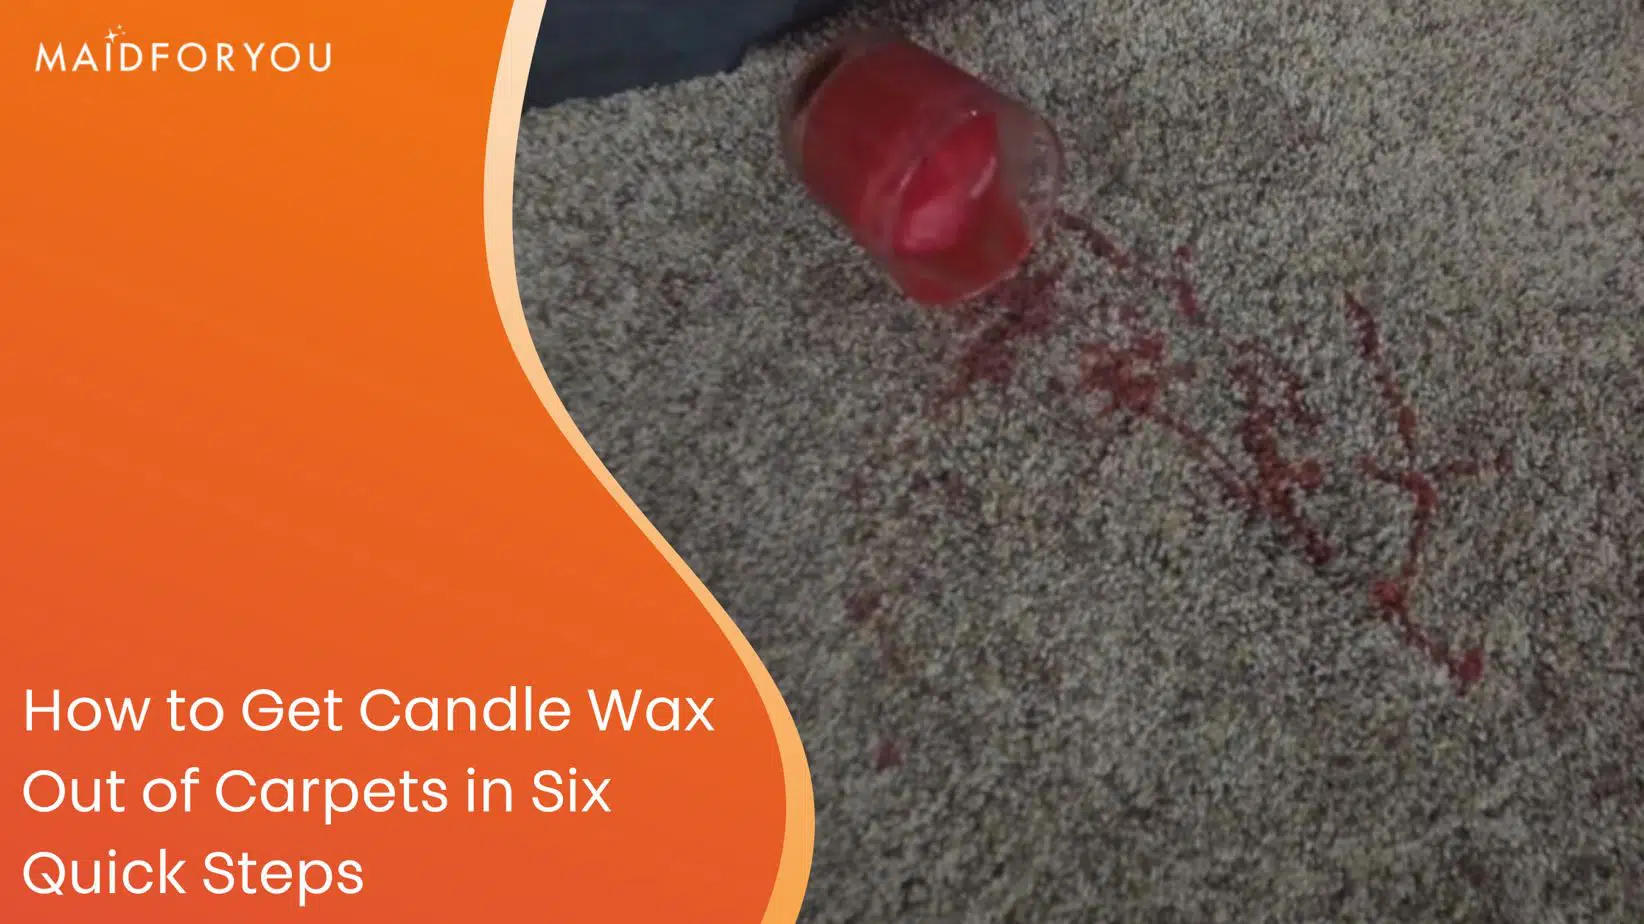 How to Remove Candle Wax From Surfaces: A Step-by-Step Guide